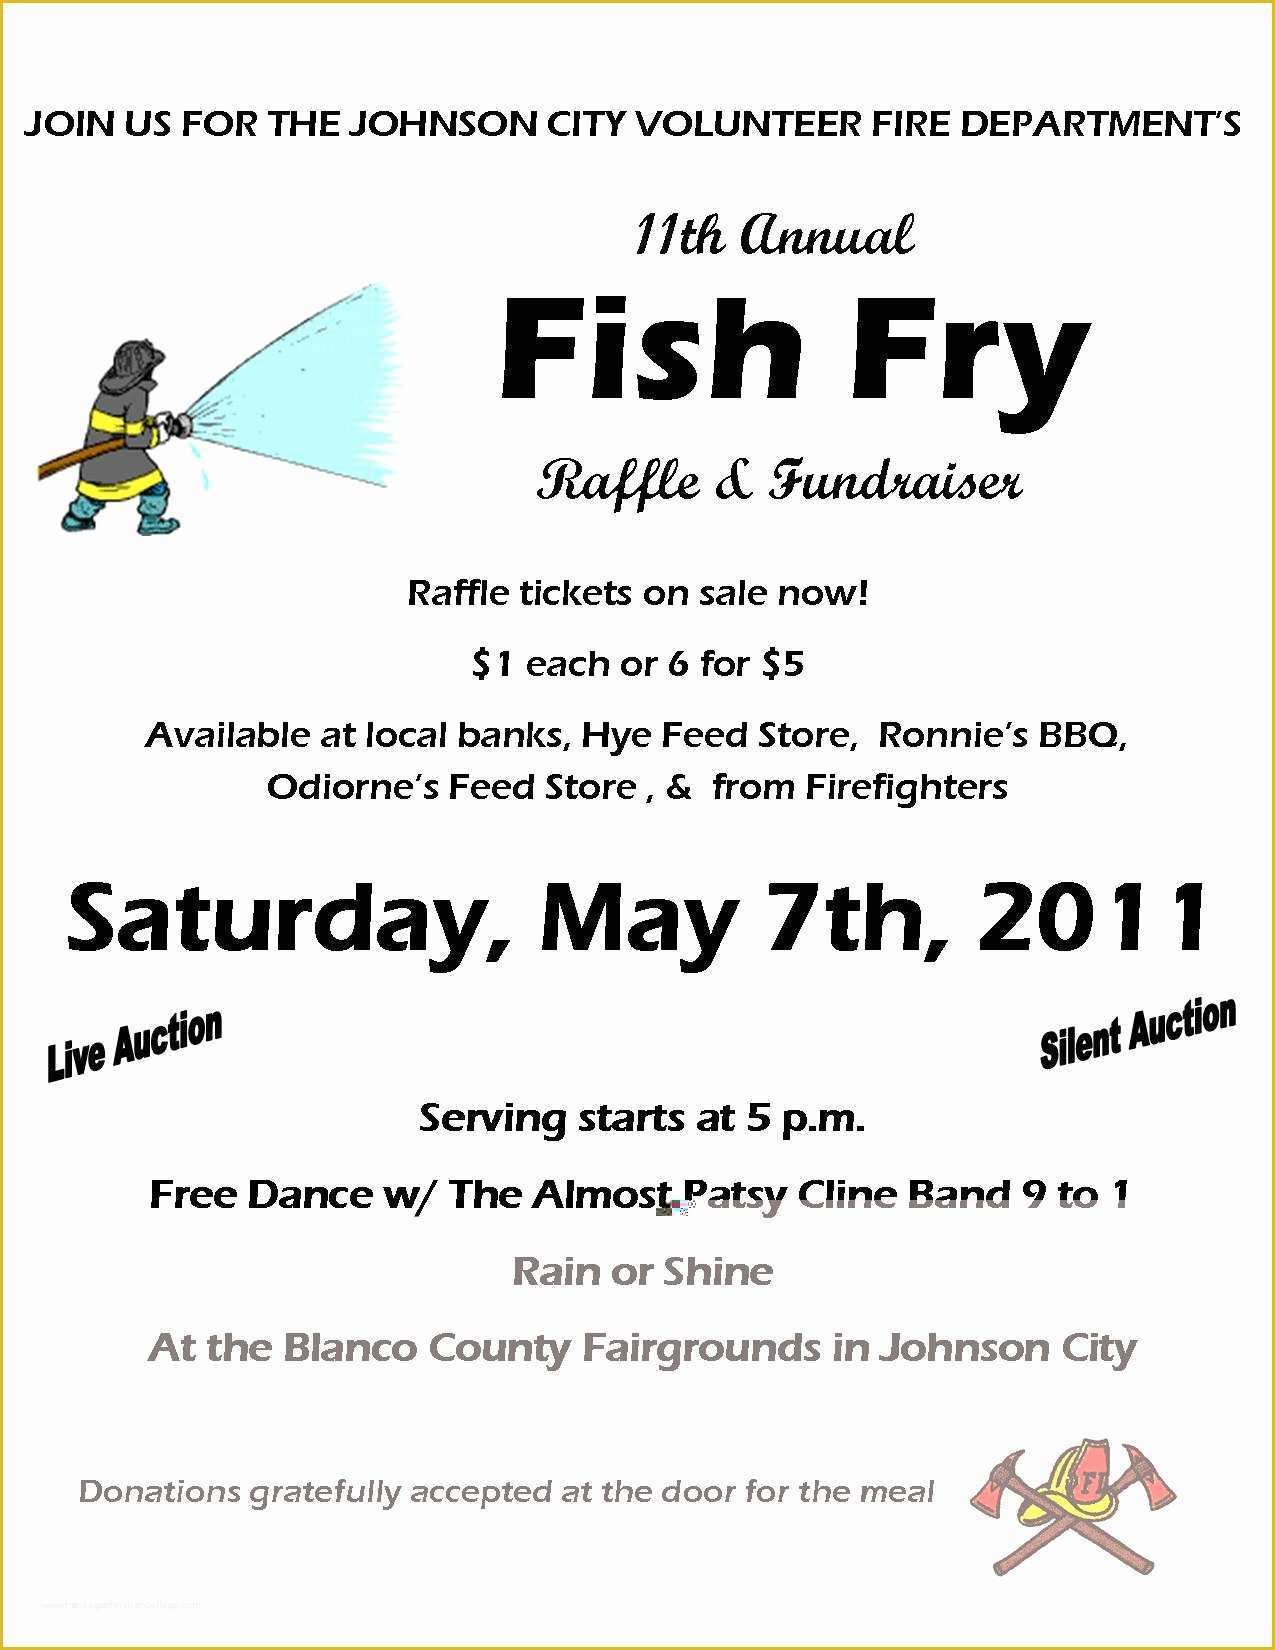 Free Fish Fry Flyer Template Of 2011 Fish Fry Flyer Jcvfd